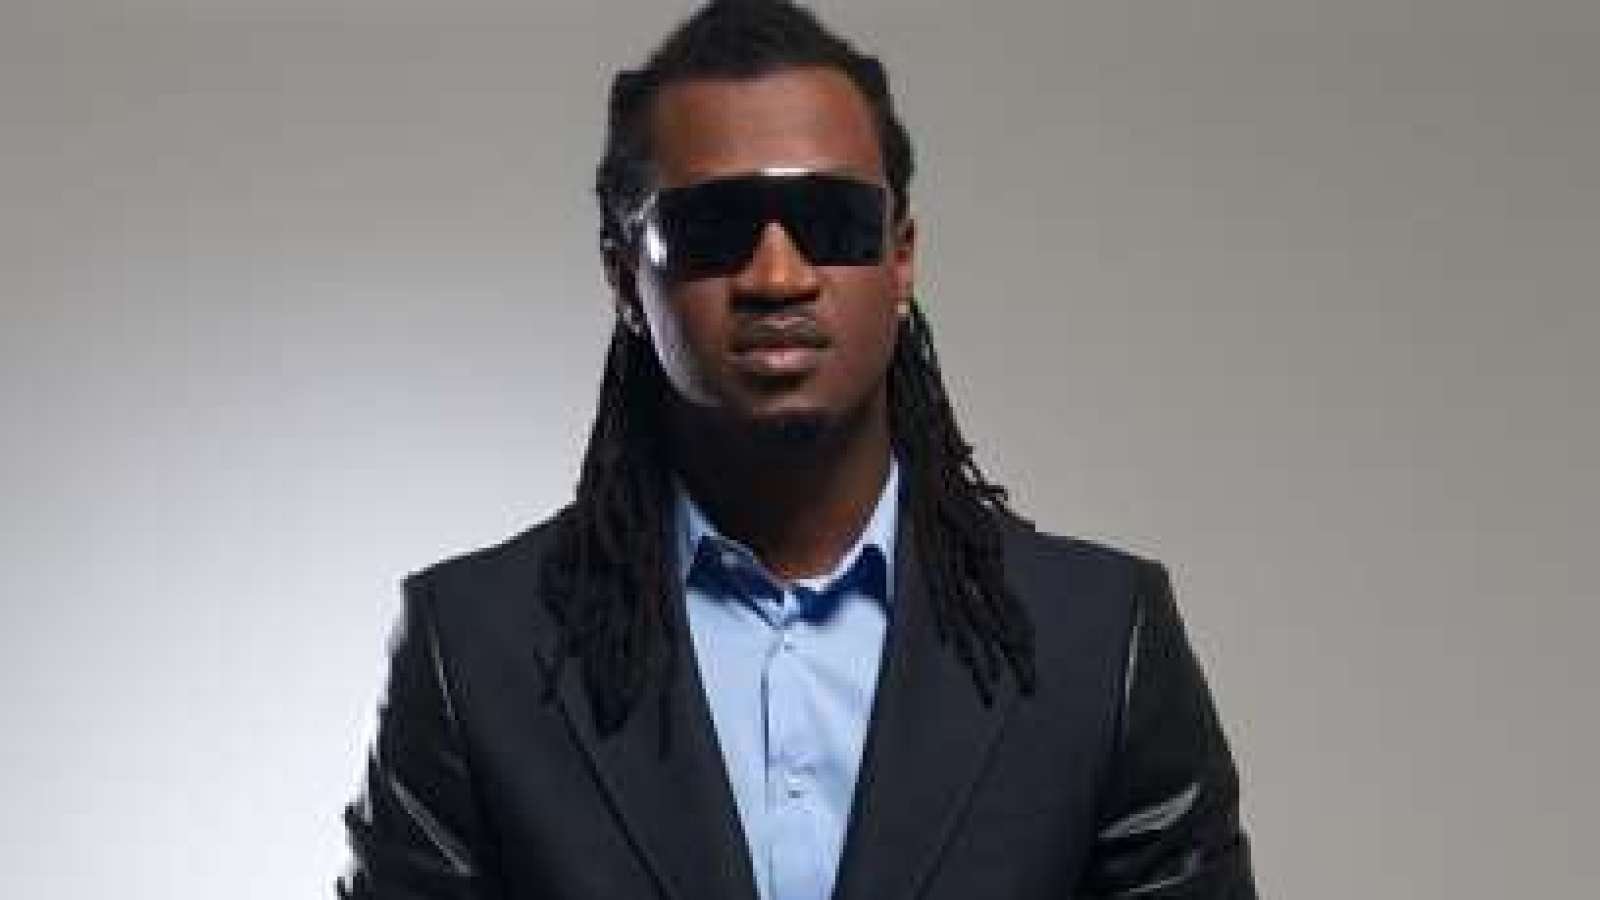 “I didn’t Work for 22 Years to Start Destroying Stuffs”- Paul Okoye Responds to Peter’s Allegations